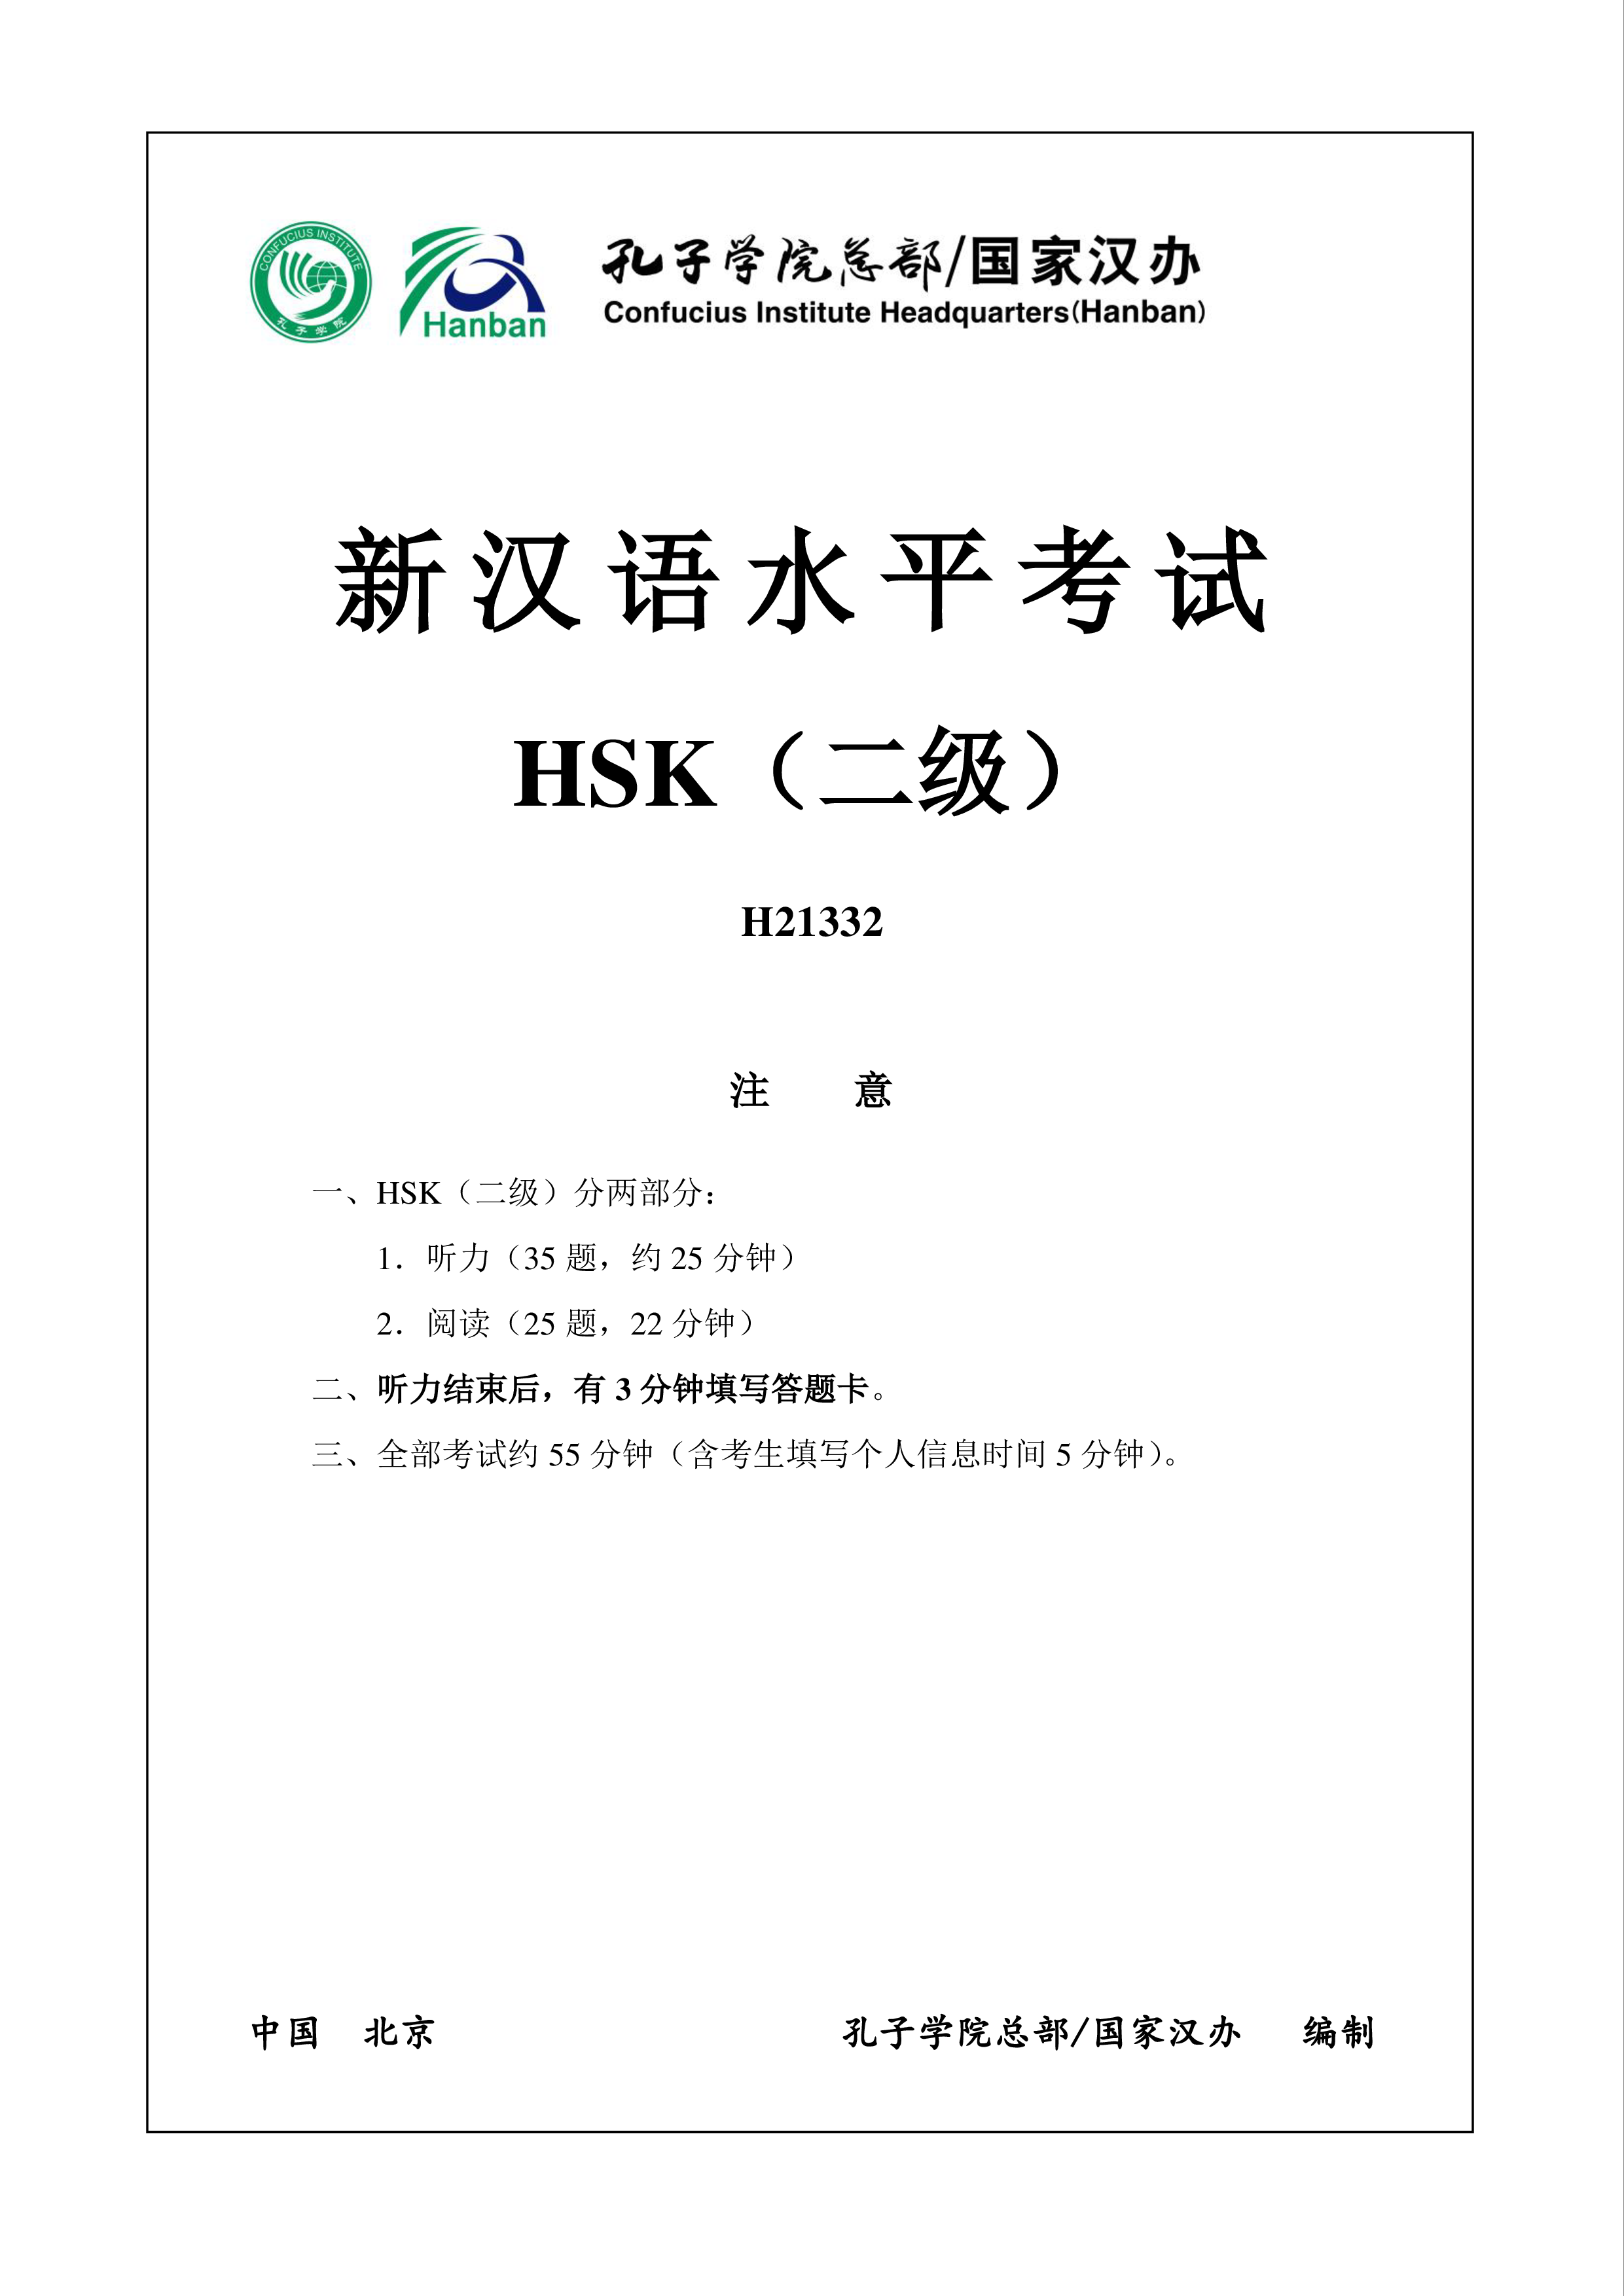 hsk2 chinese exam including answers # hsk2 h21332 plantilla imagen principal